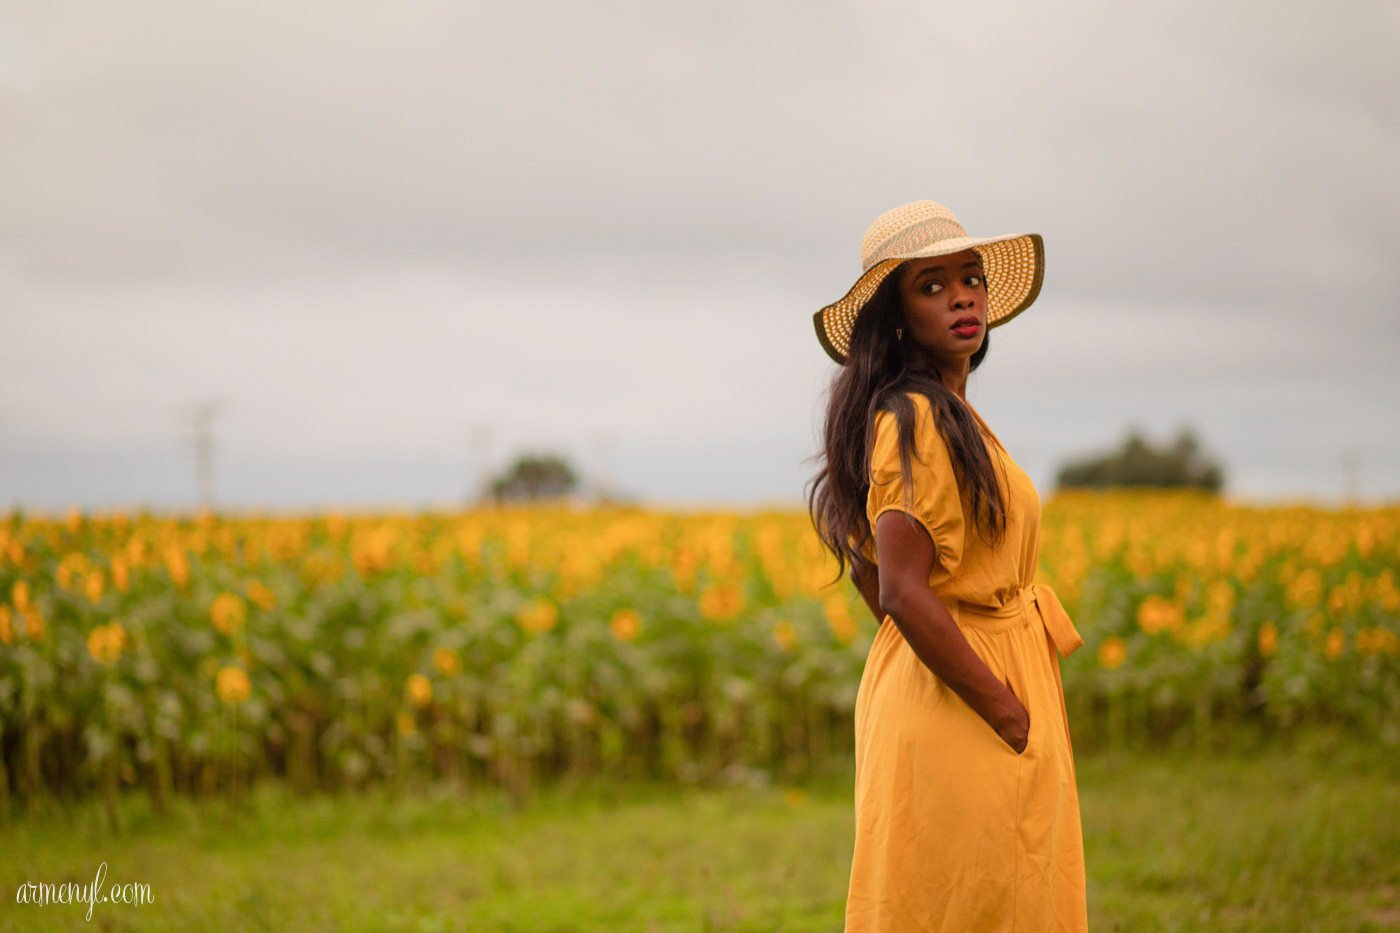 A travel through fashion Self Portrait series by Armenyl featuring the sunflower fields in Jarretsville Maryland.